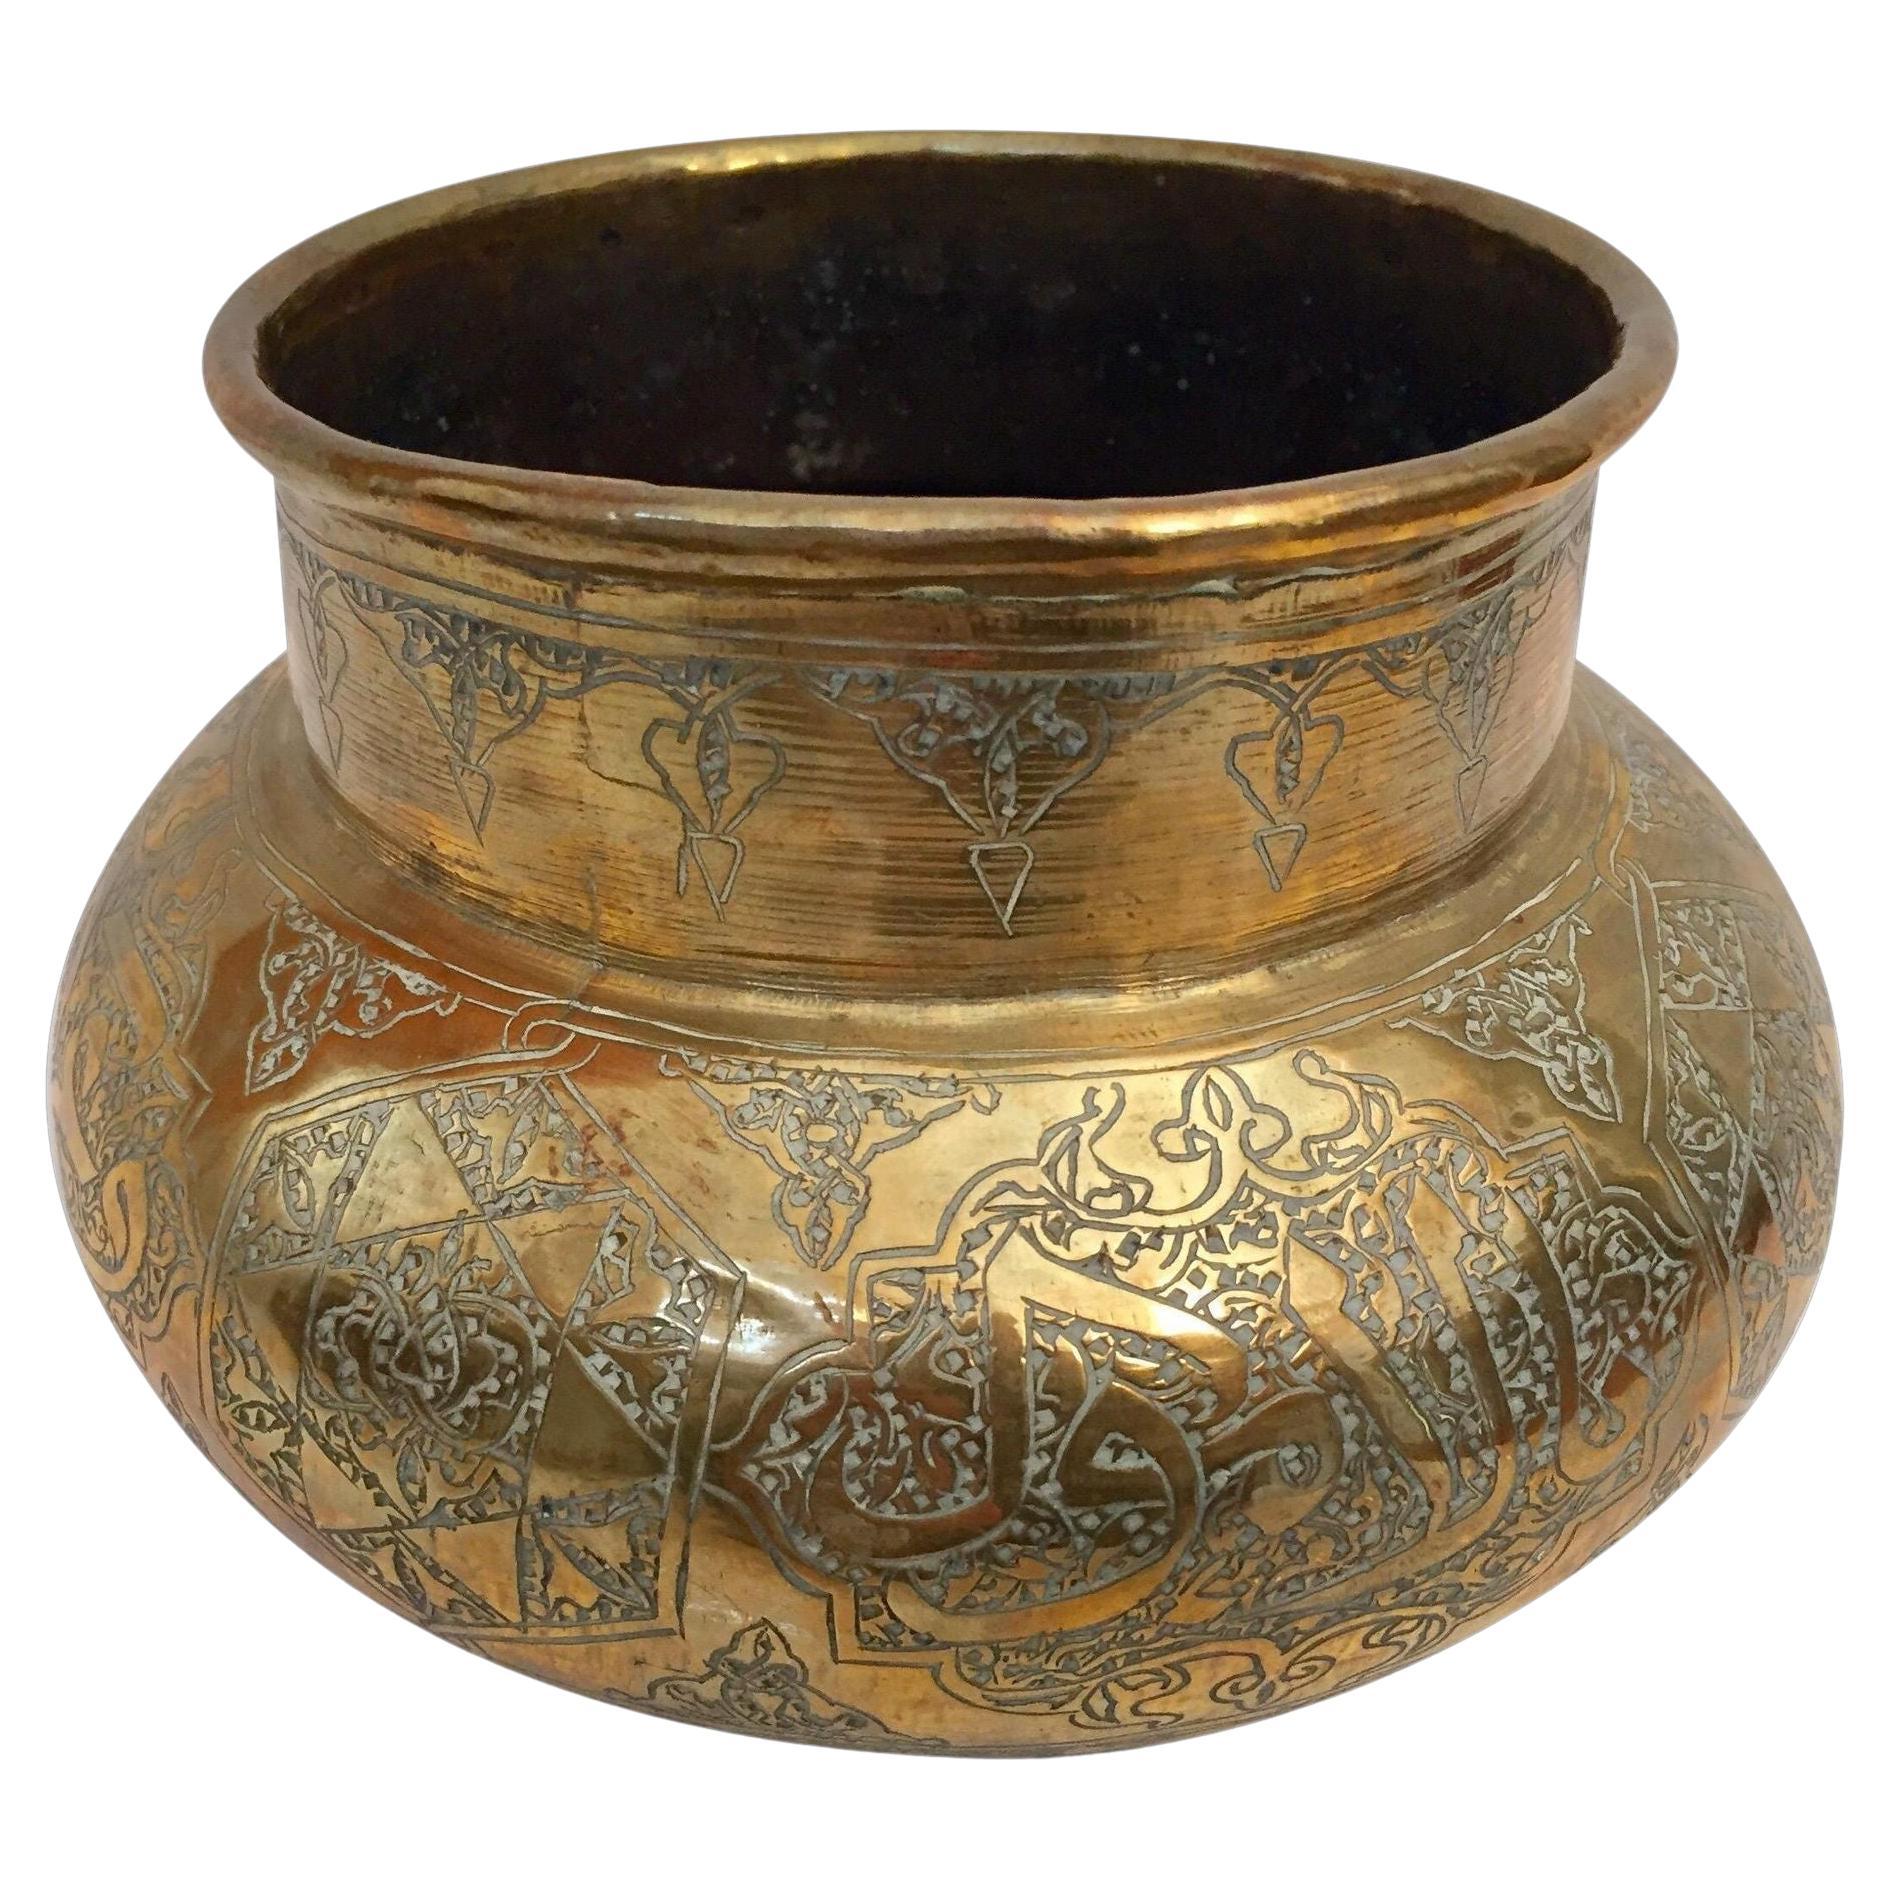 Middle Eastern Hand-Etched Islamic Brass Vase with Calligraphy Writing